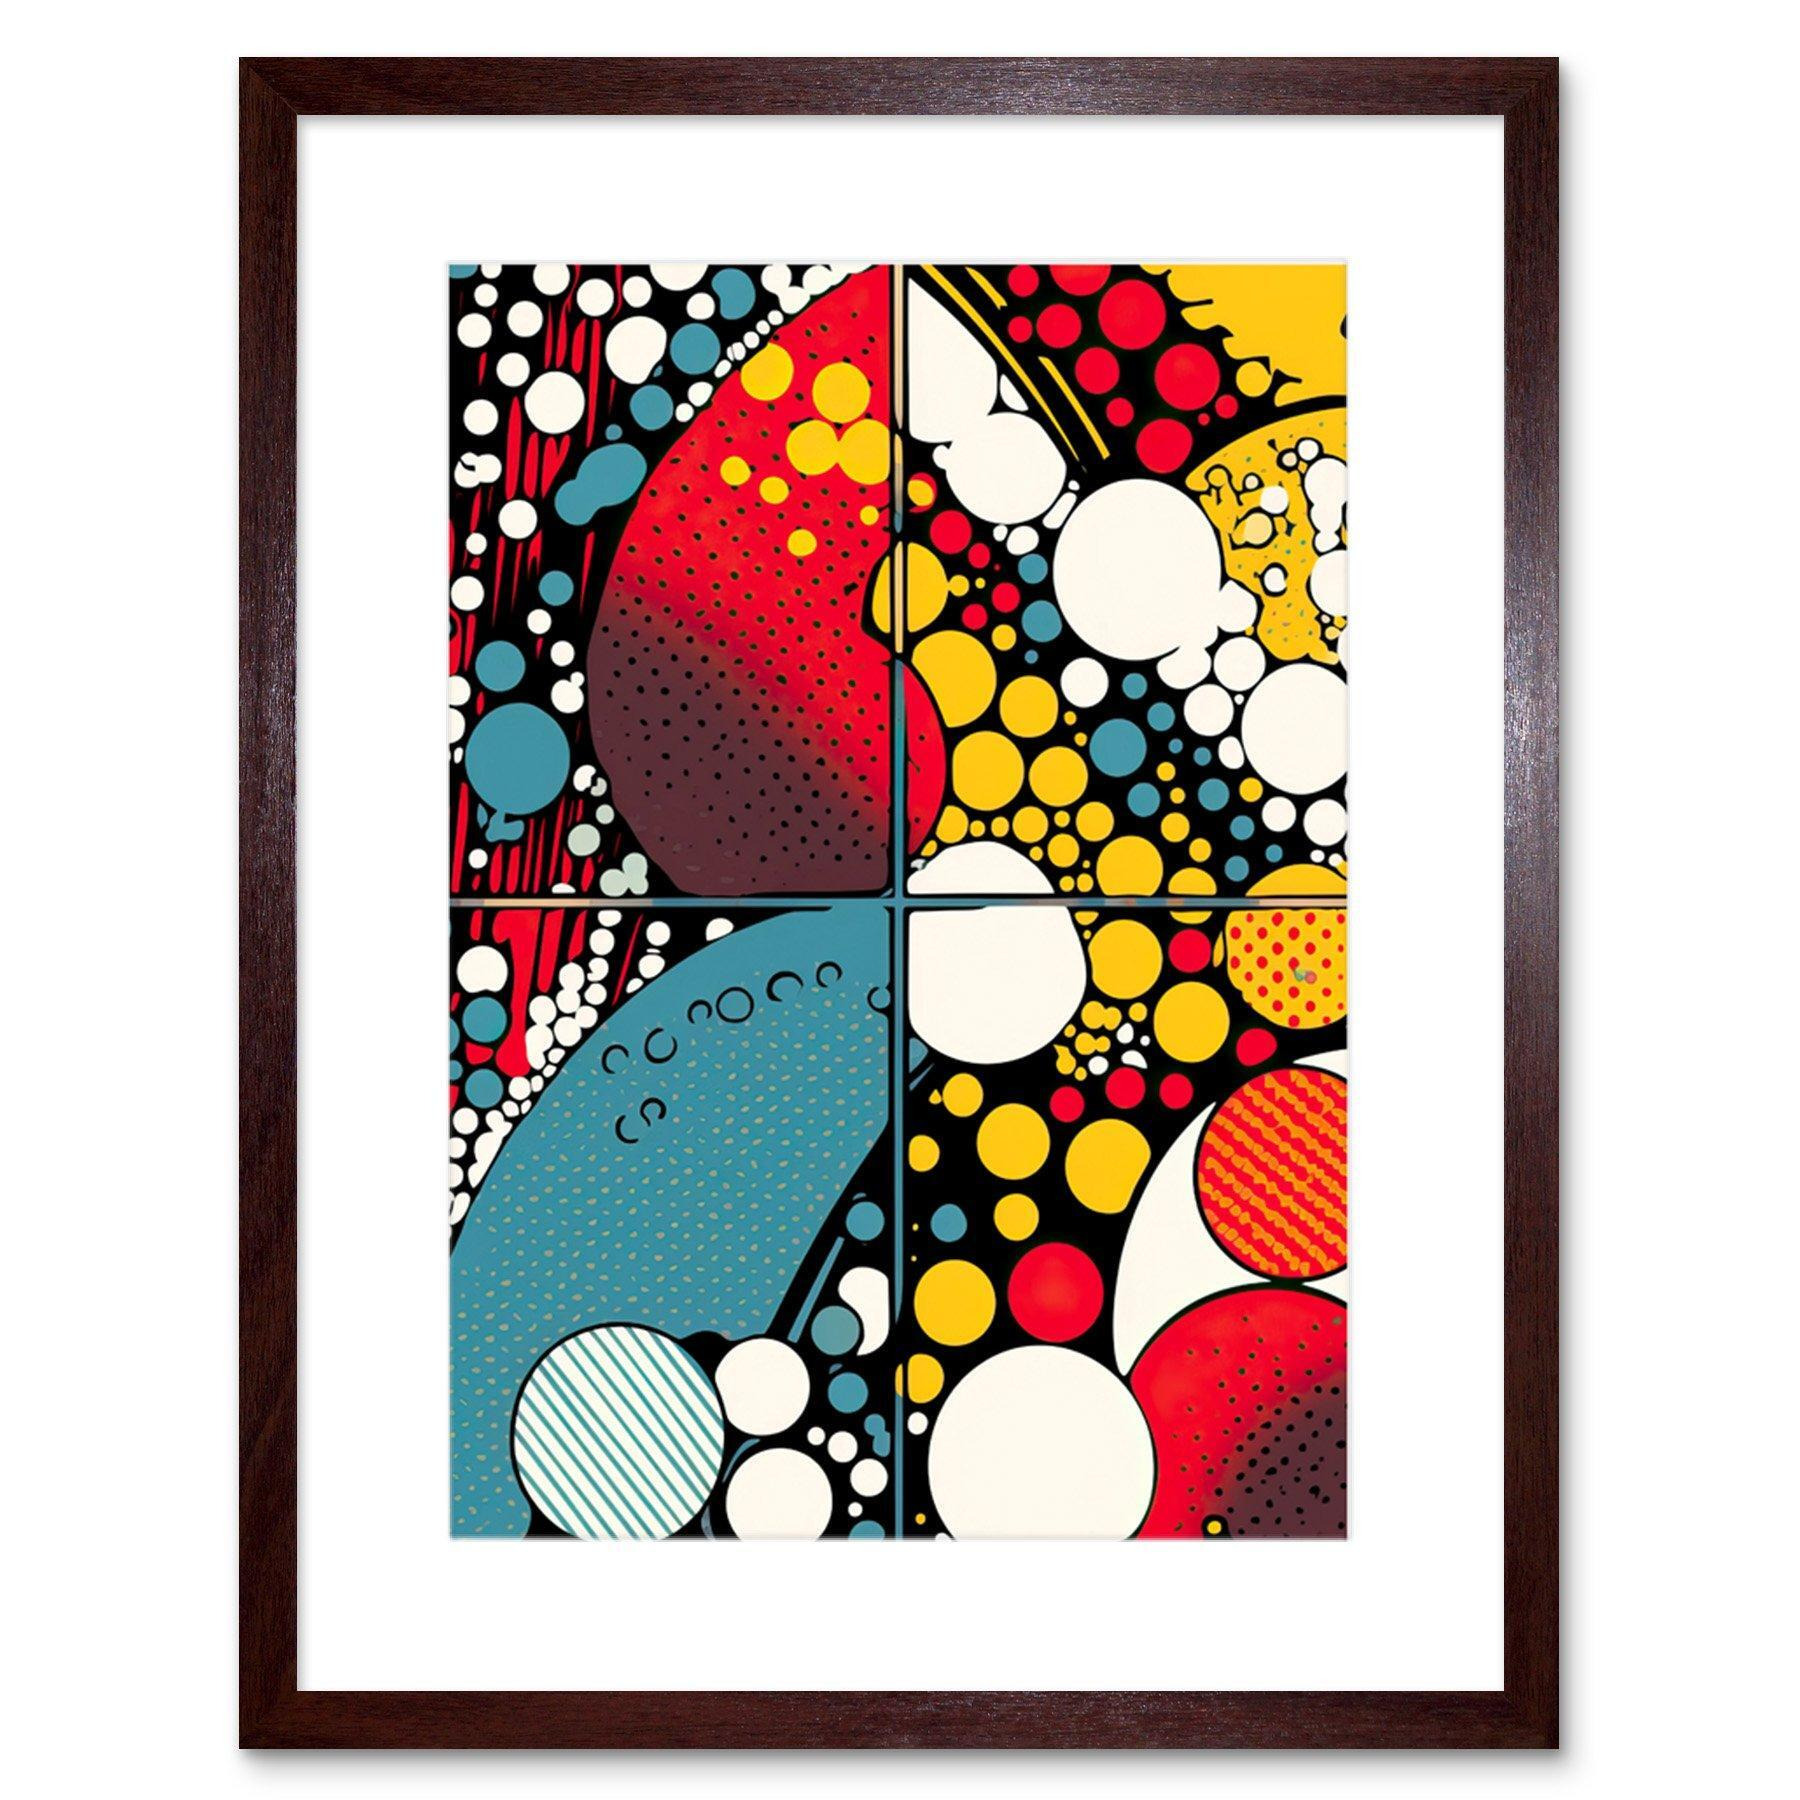 Abstract Geometric Patterns and Bubbles Comic Book Style Red Blue Yellow White Pop Art Halftone Artwork Framed Wall Art Print 9X7 Inch - image 1